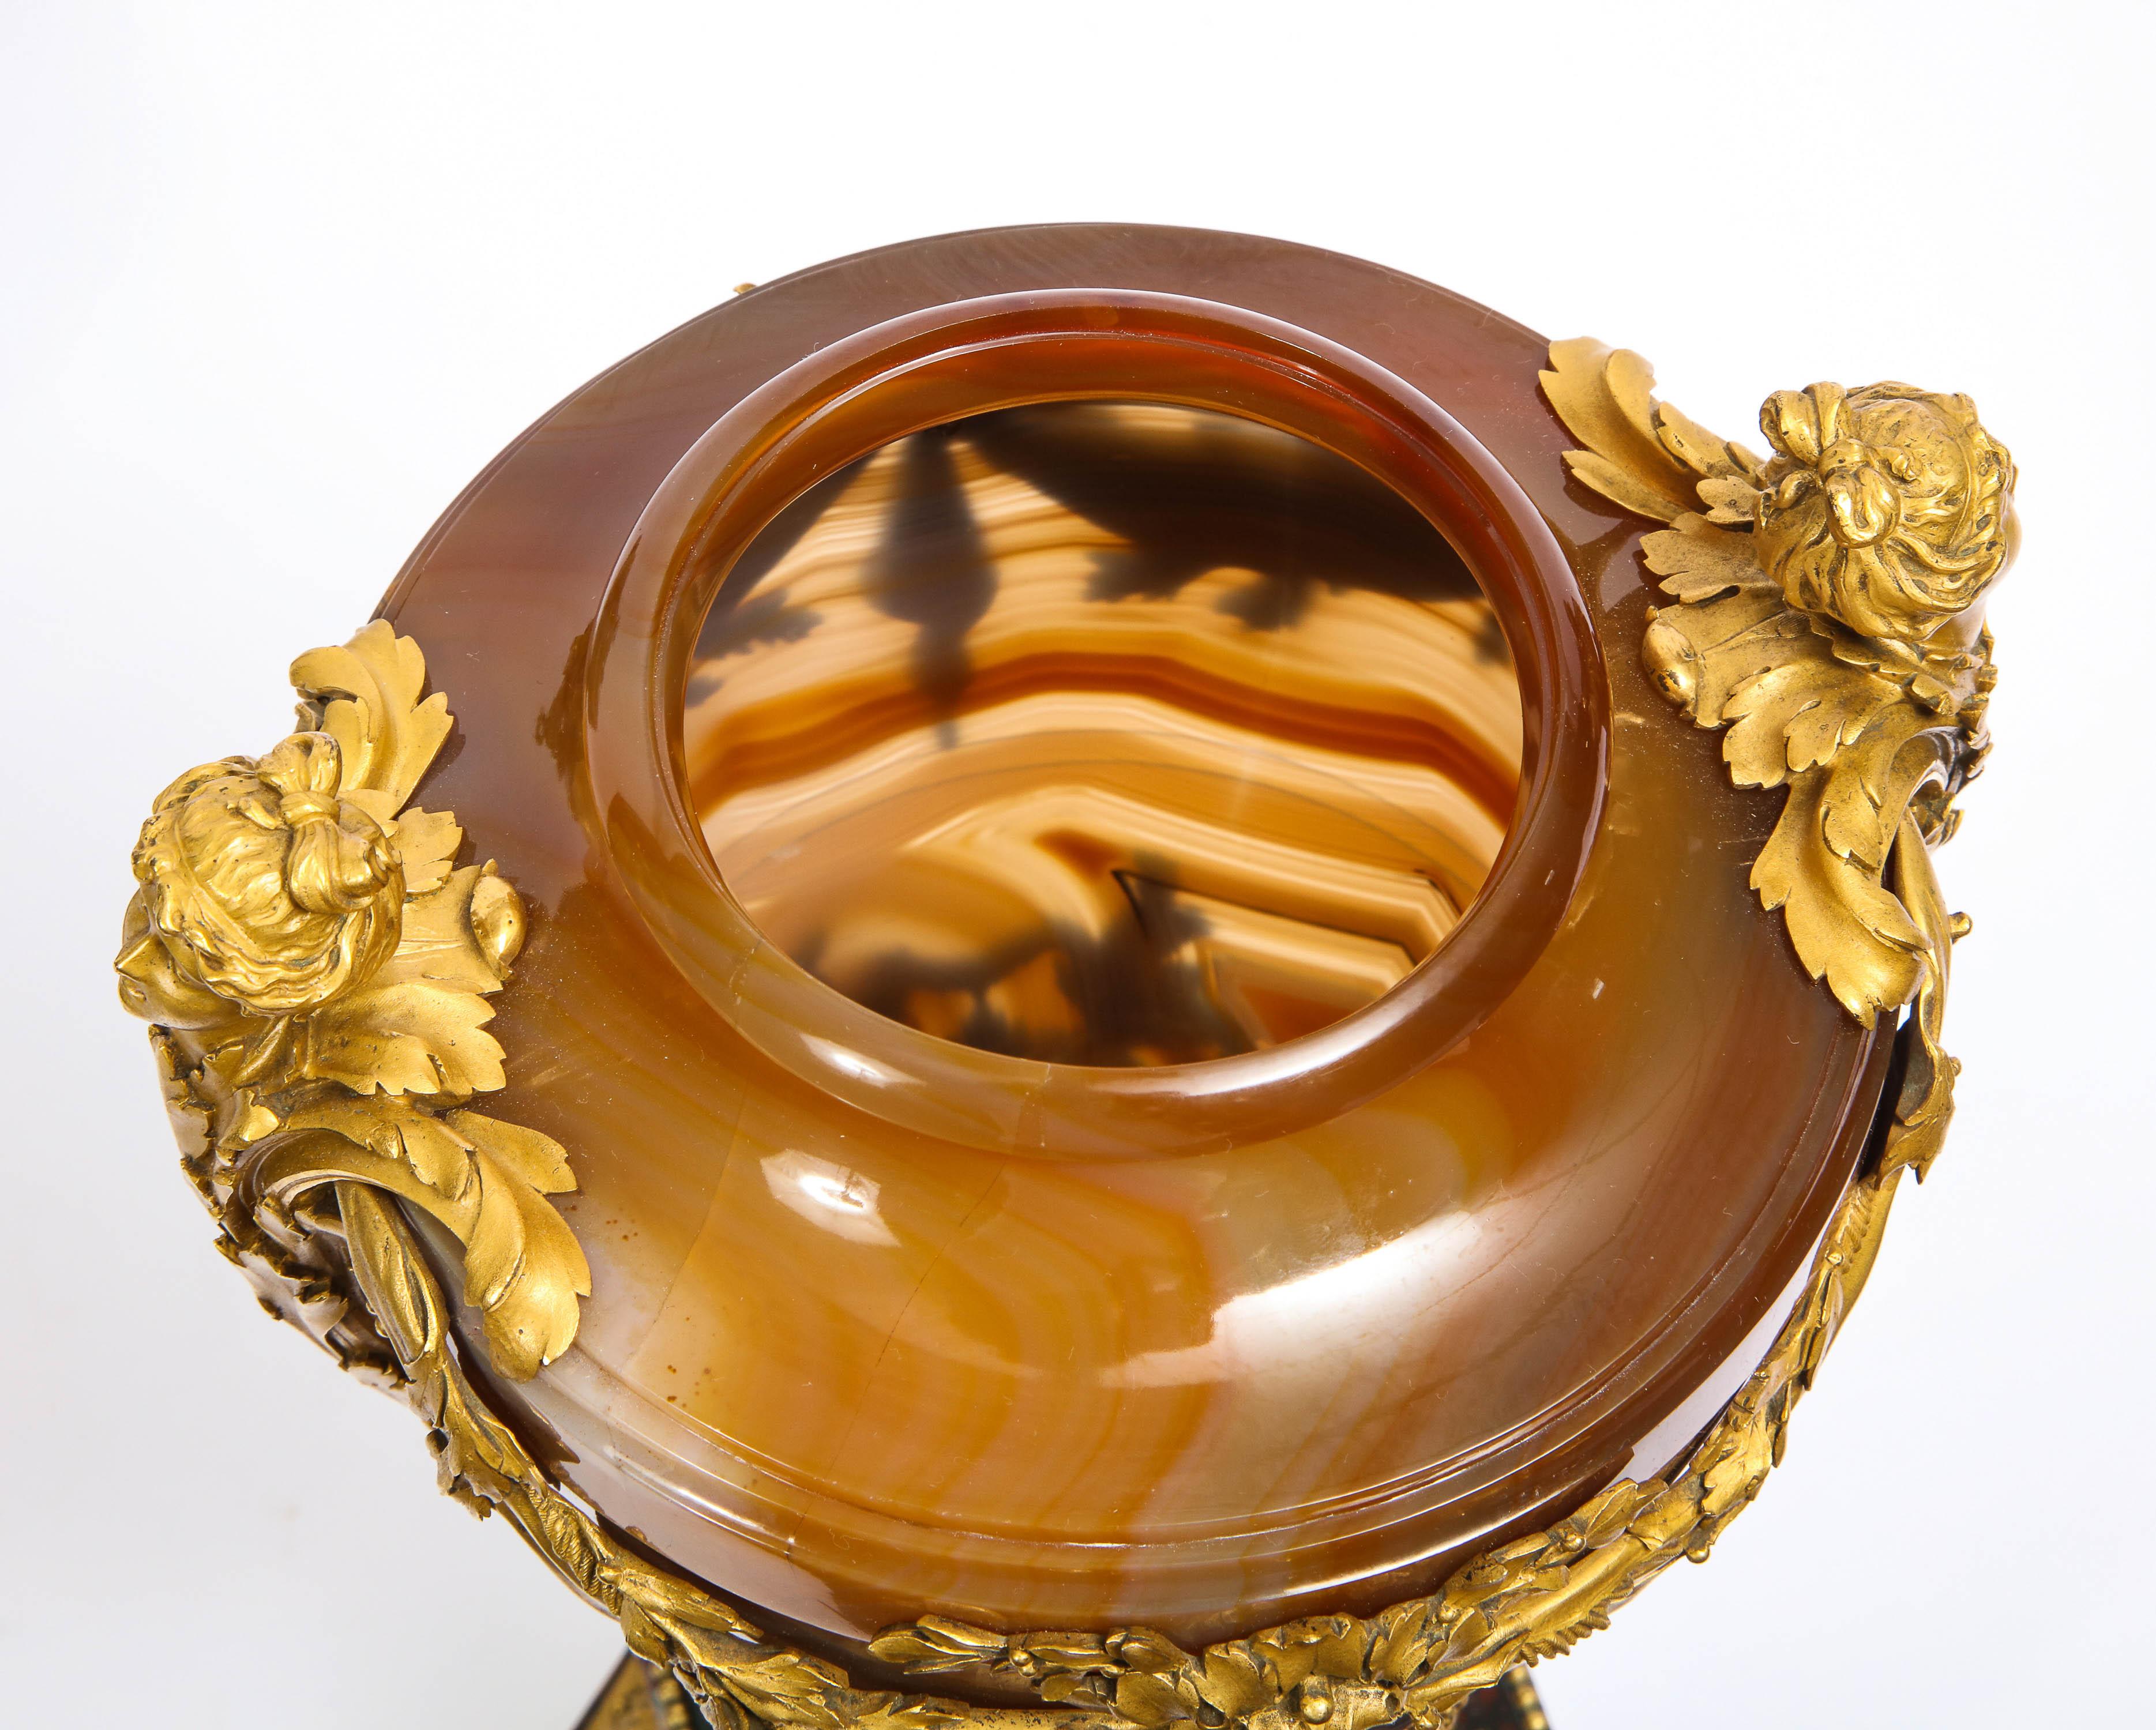 19th Century Important Pair of Russian Imperial Agate and Bloodstone Ormolu Mtd. Jasper Vases